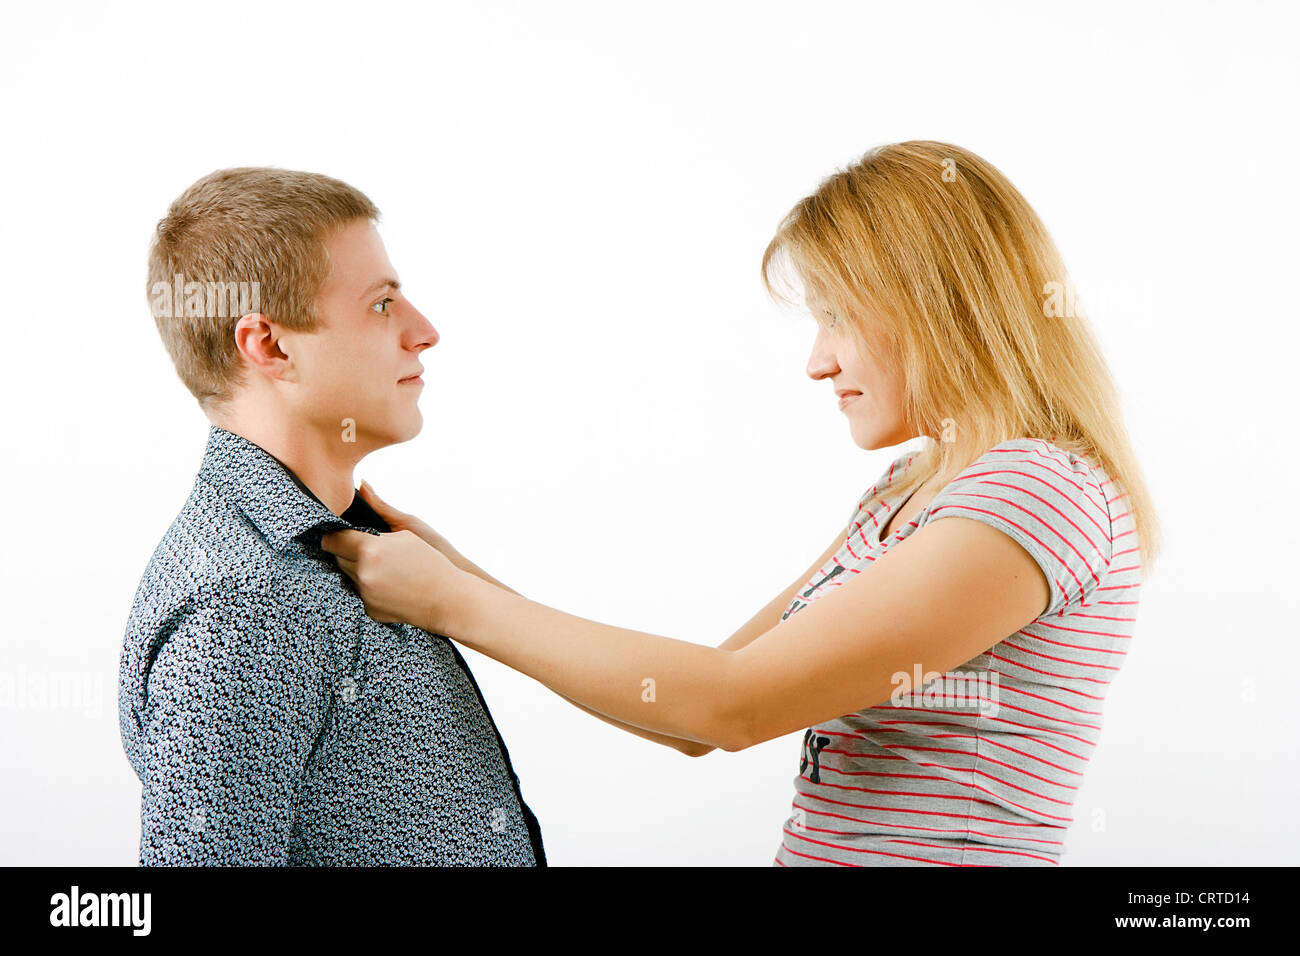 Violence in the family. Wife beats husband Stock Photo - Alamy